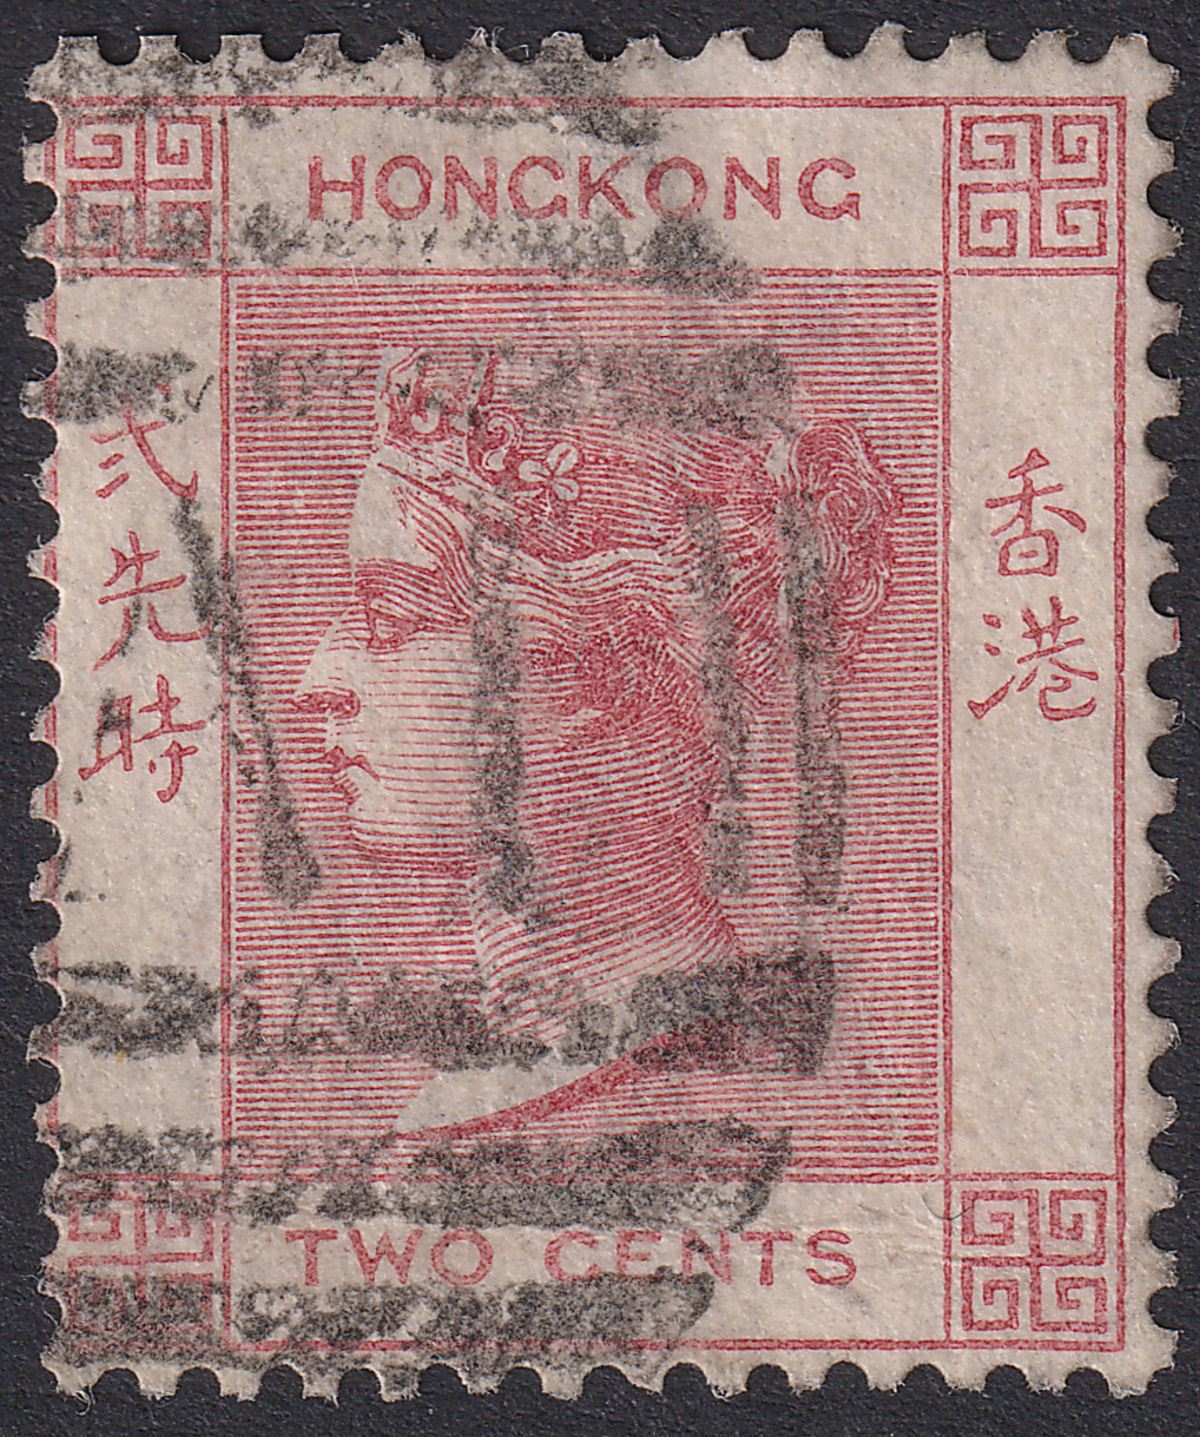 Hong Kong 1882 QV 2c Rose-Lake Used with A1 Postmark Amoy SG Z31a cat £70